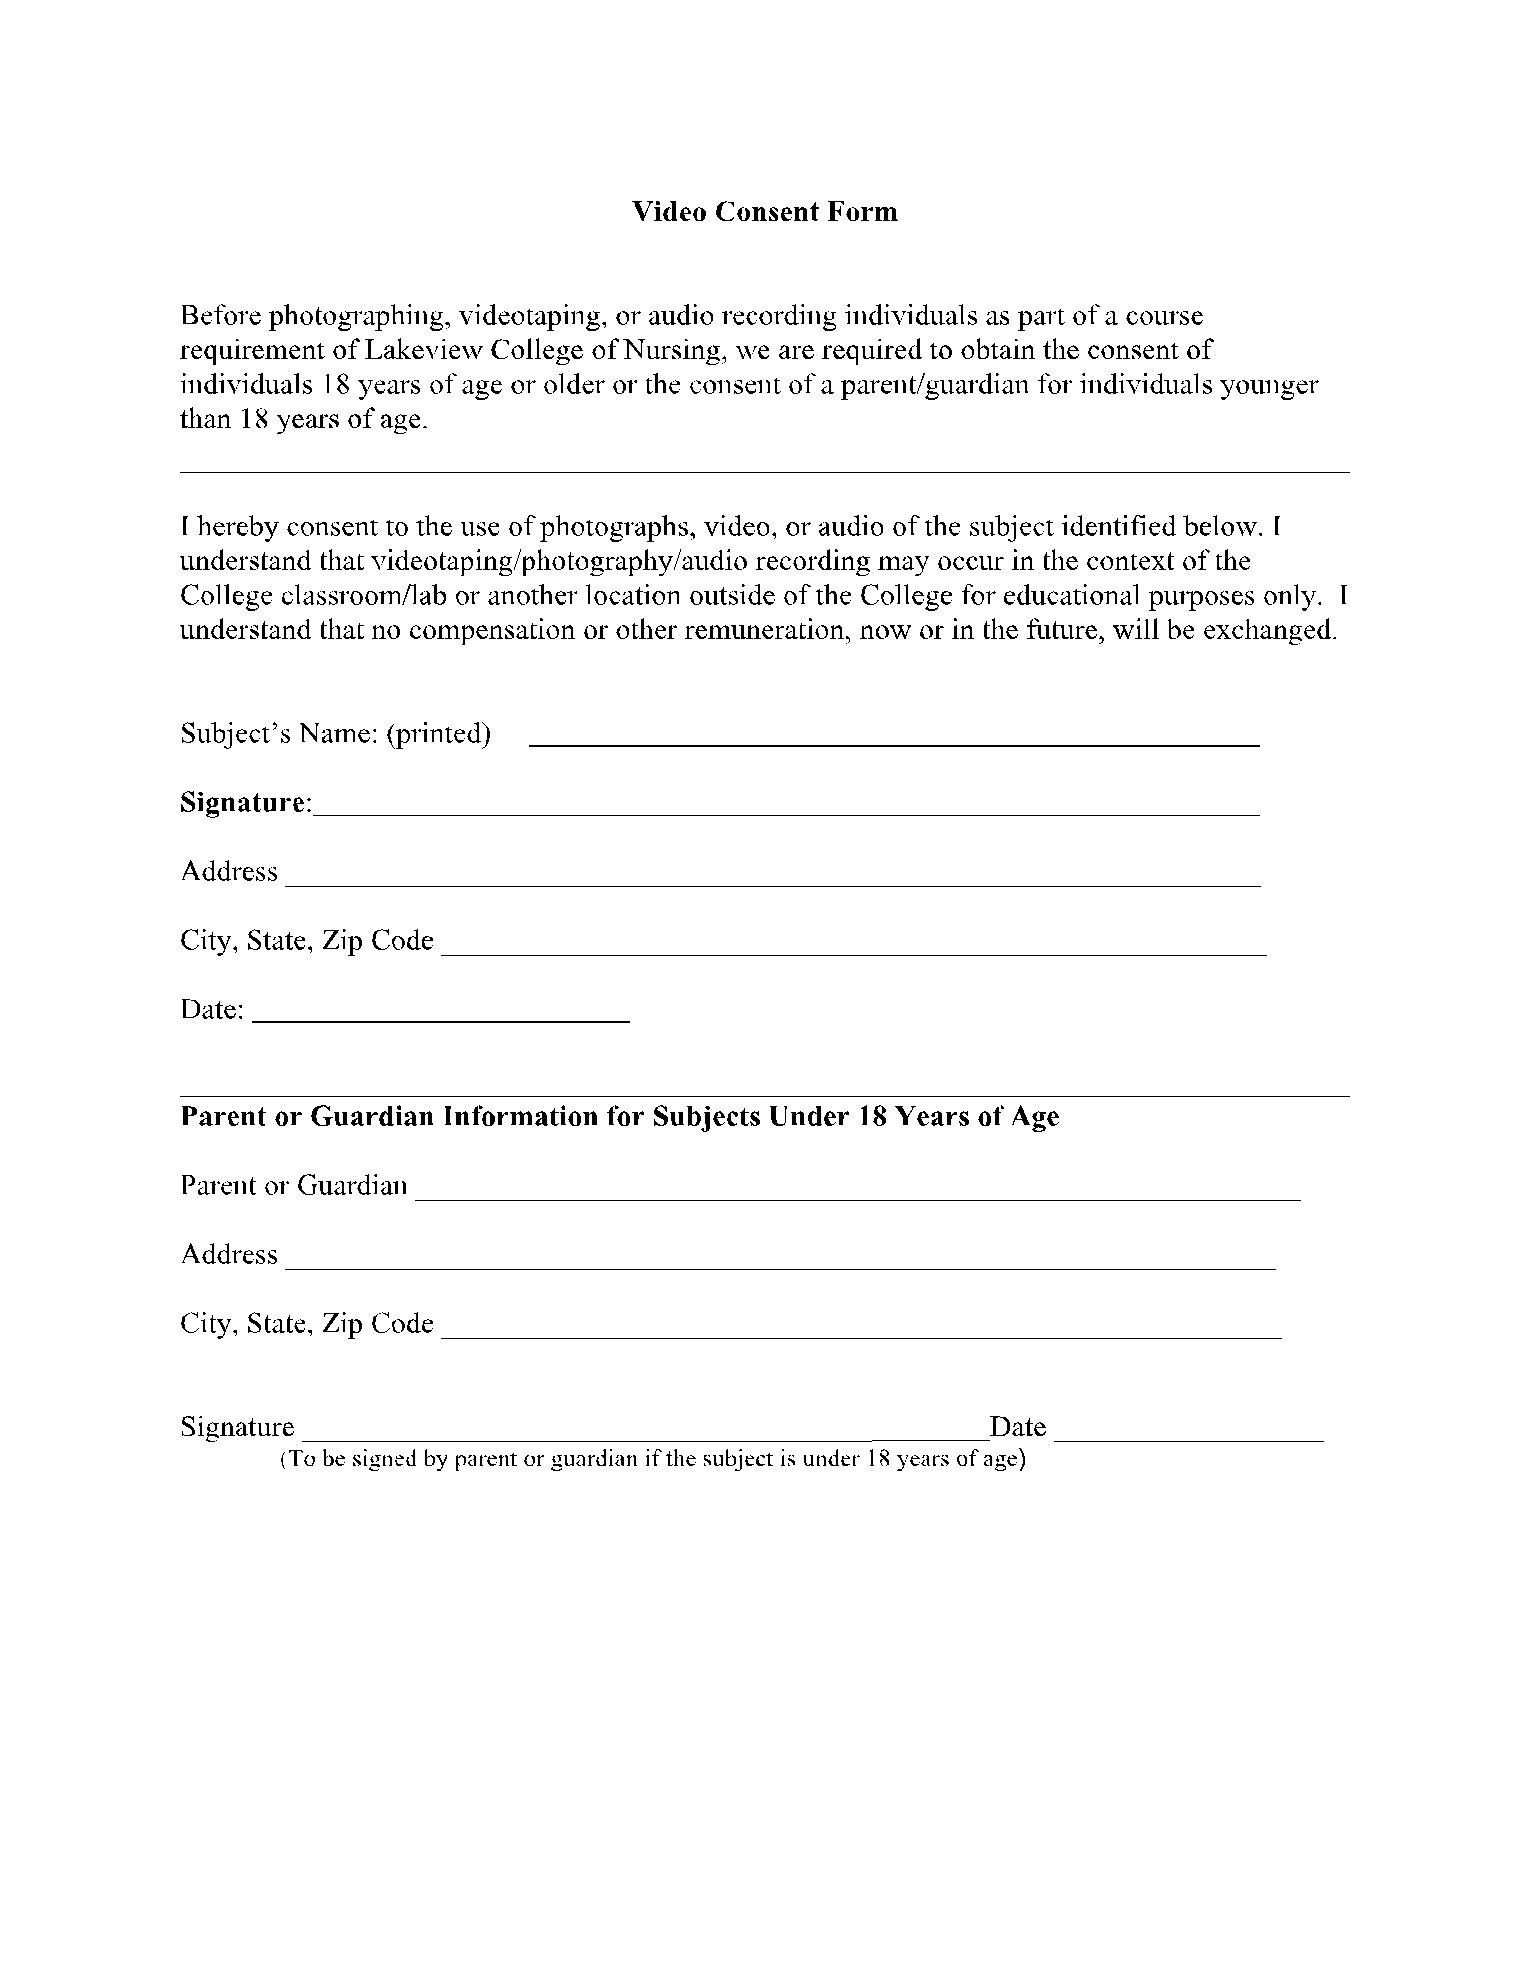 Video Consent Form